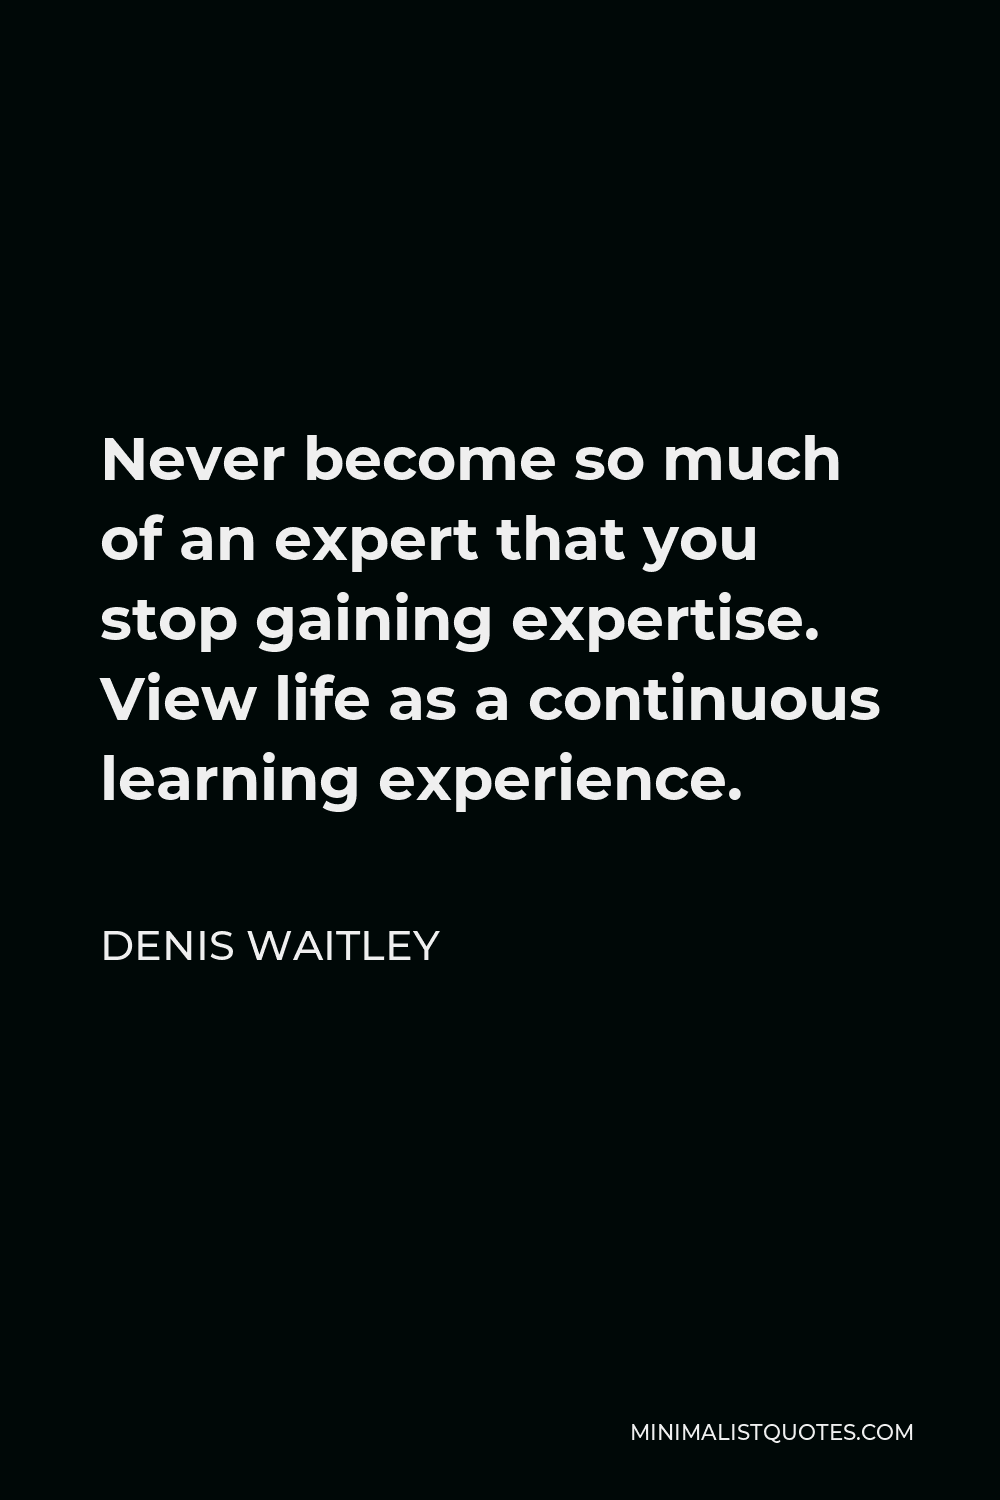 Denis Waitley Quote - Never become so much of an expert that you stop gaining expertise. View life as a continuous learning experience.